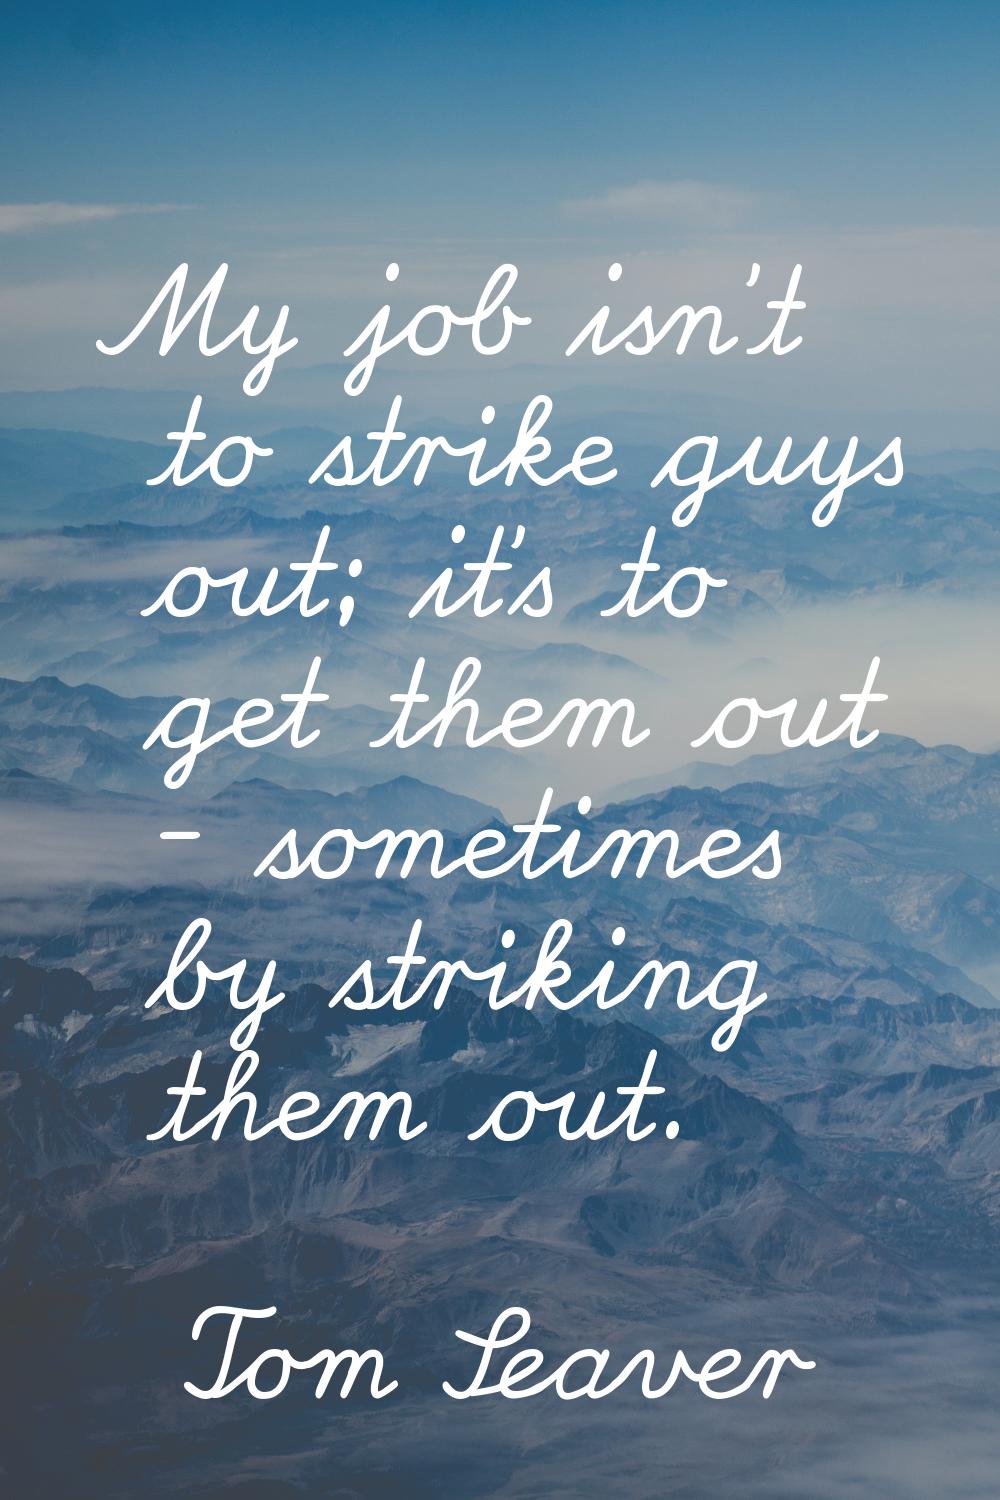 My job isn't to strike guys out; it's to get them out - sometimes by striking them out.